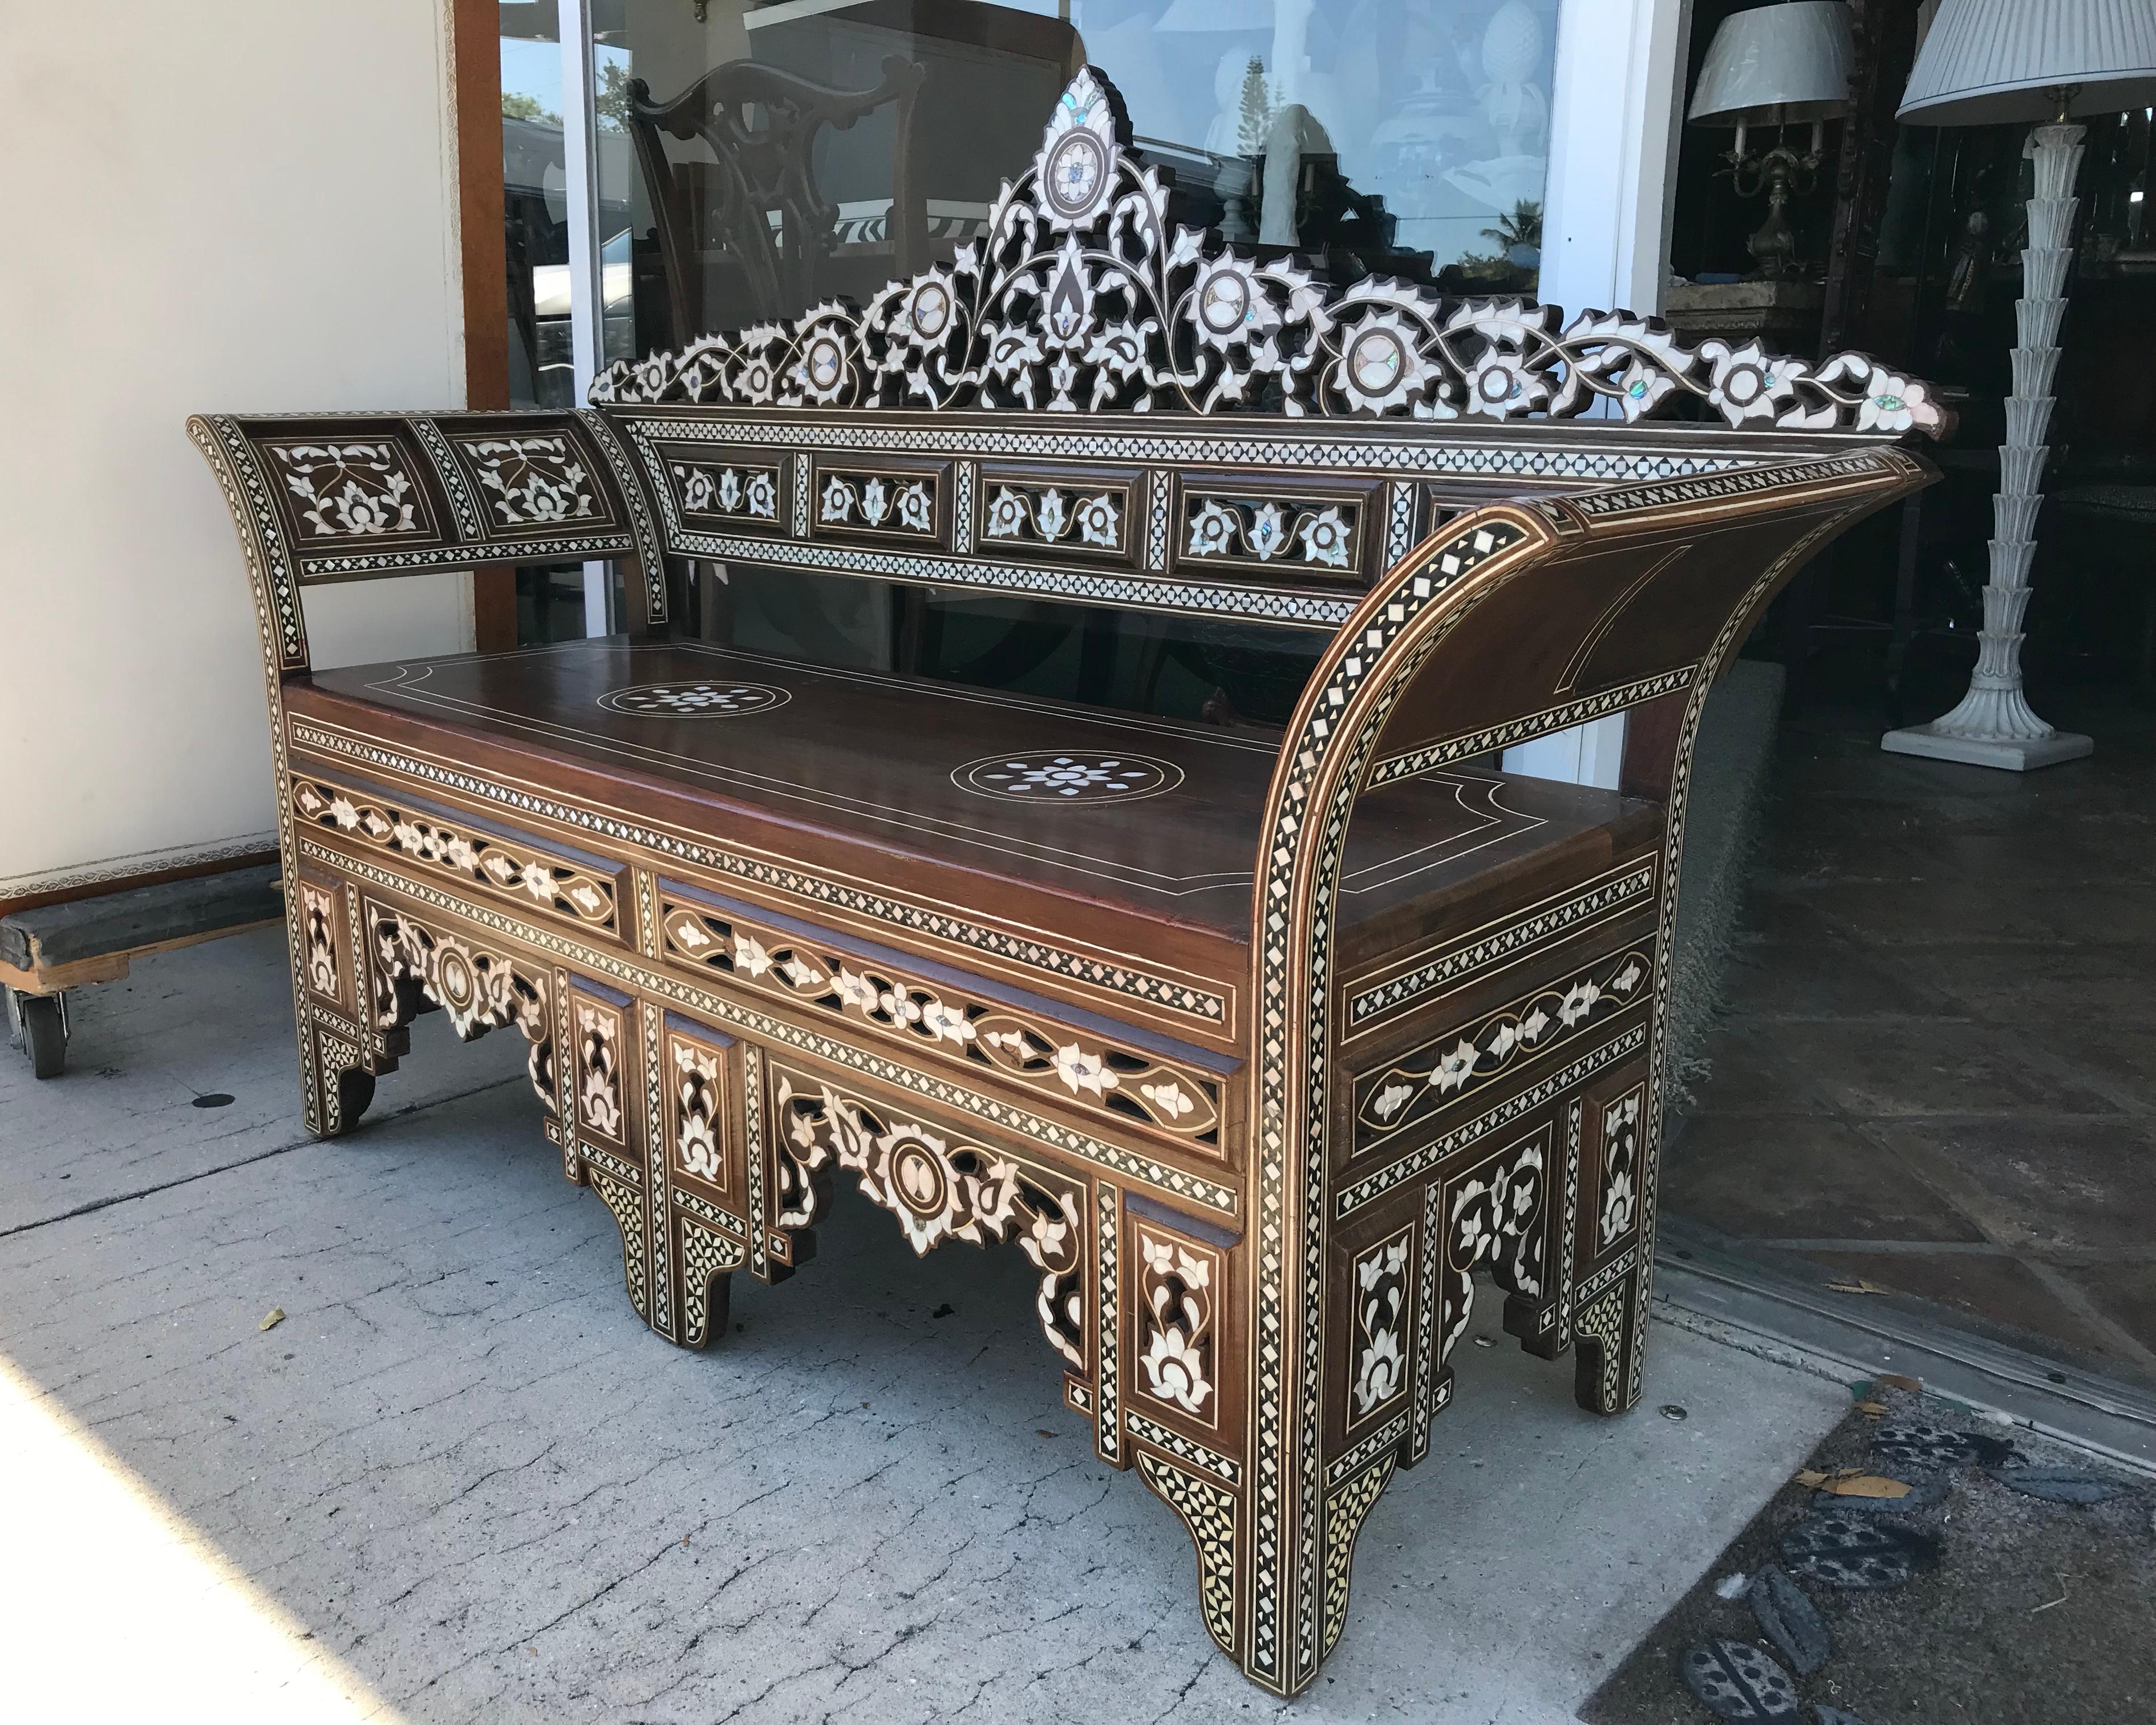 Dramatic in style with fabulous inlay work in camel bone and mother of pearl.
The inlays are extensive and large thruout the front of the piece.
Nicely scaled.